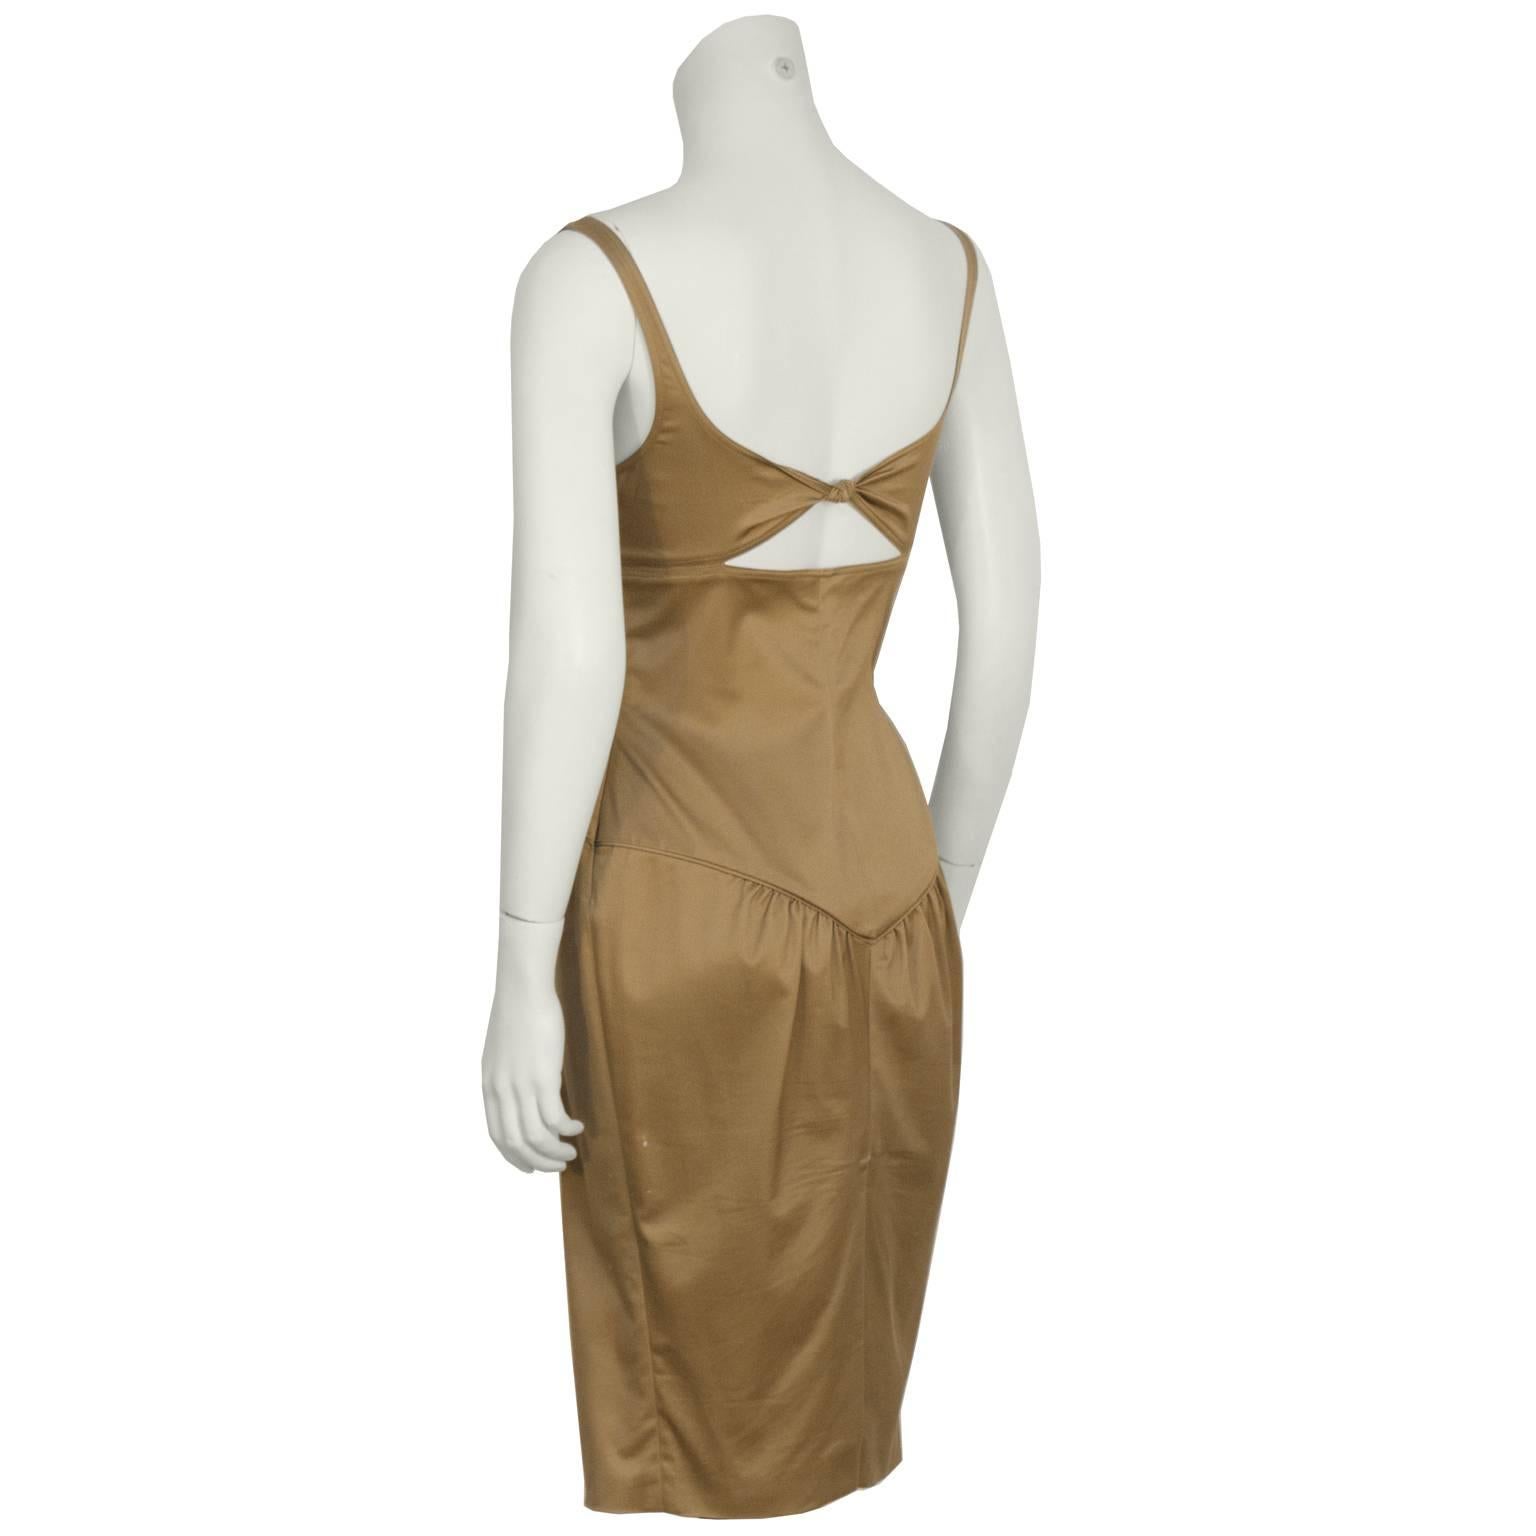 Gucci by Tom Ford khaki wiggle dress with matching jacket from the Fall/Winter 2003 collection. The fitted dress has a corset like bodice, with a scoop neckline and gathering at the bust. The back has a small cutout with a knot, and a slit at the